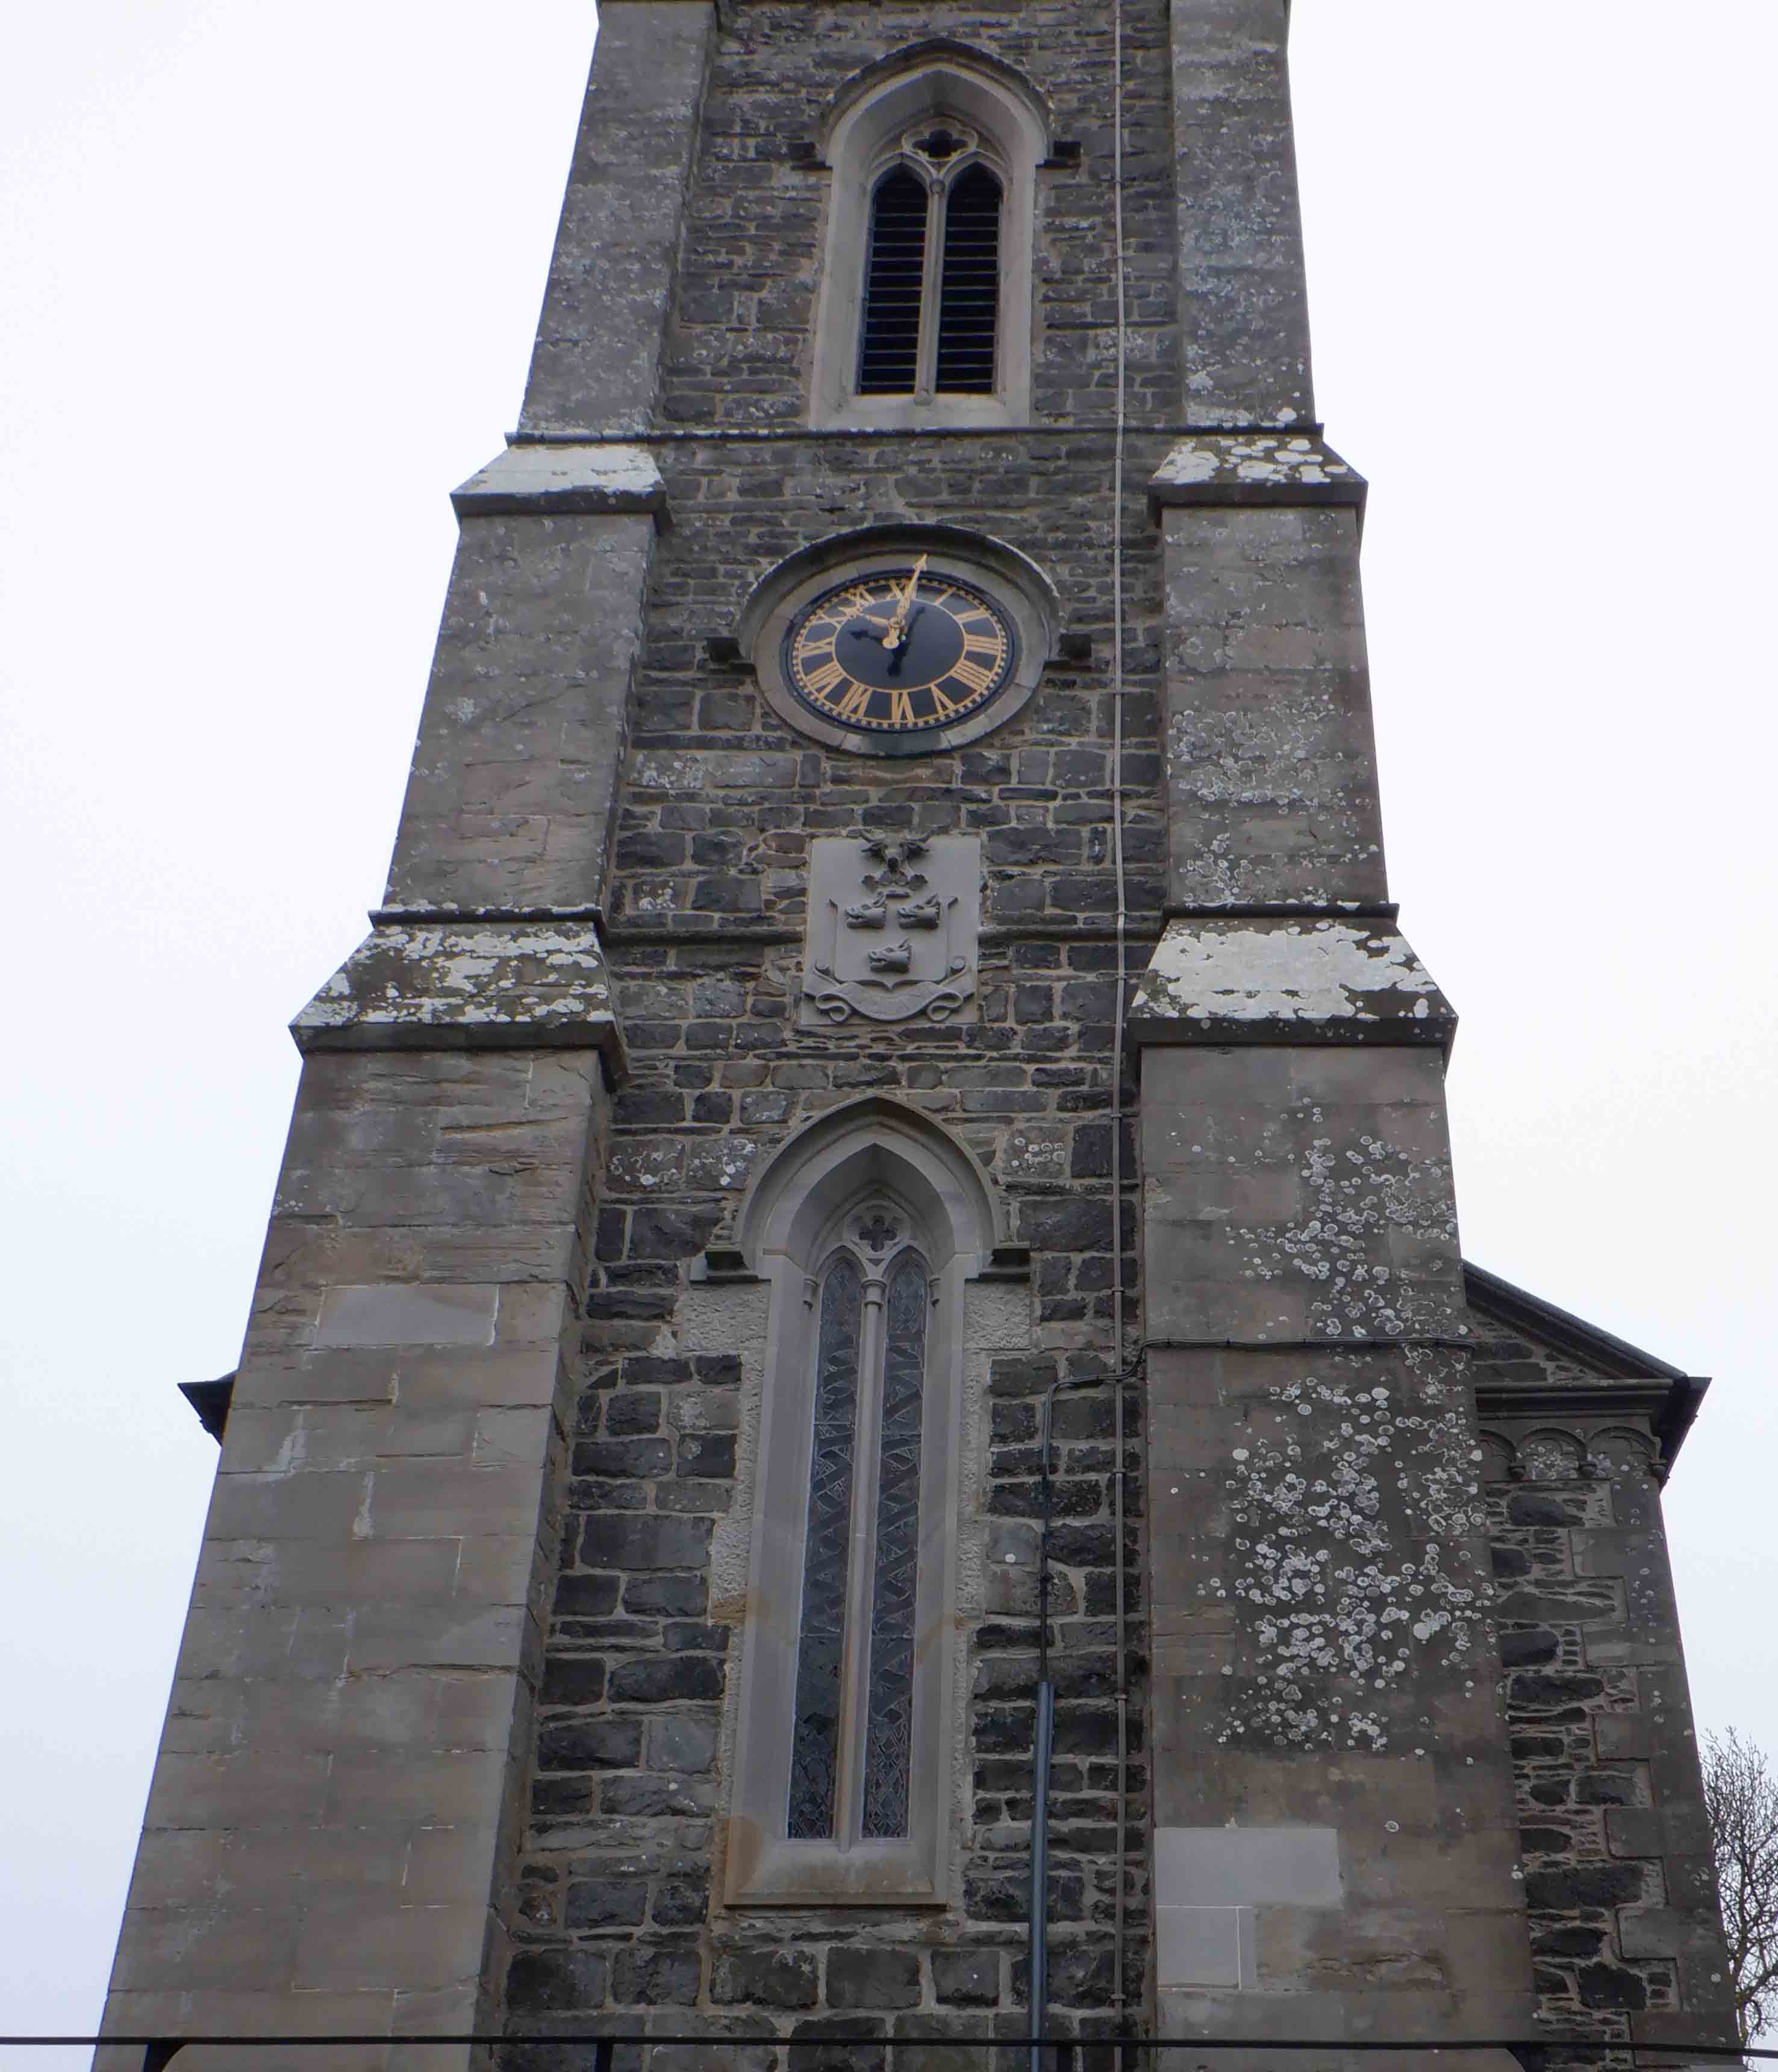 What animals are below the west facing clock on the spire of Kilmood church?